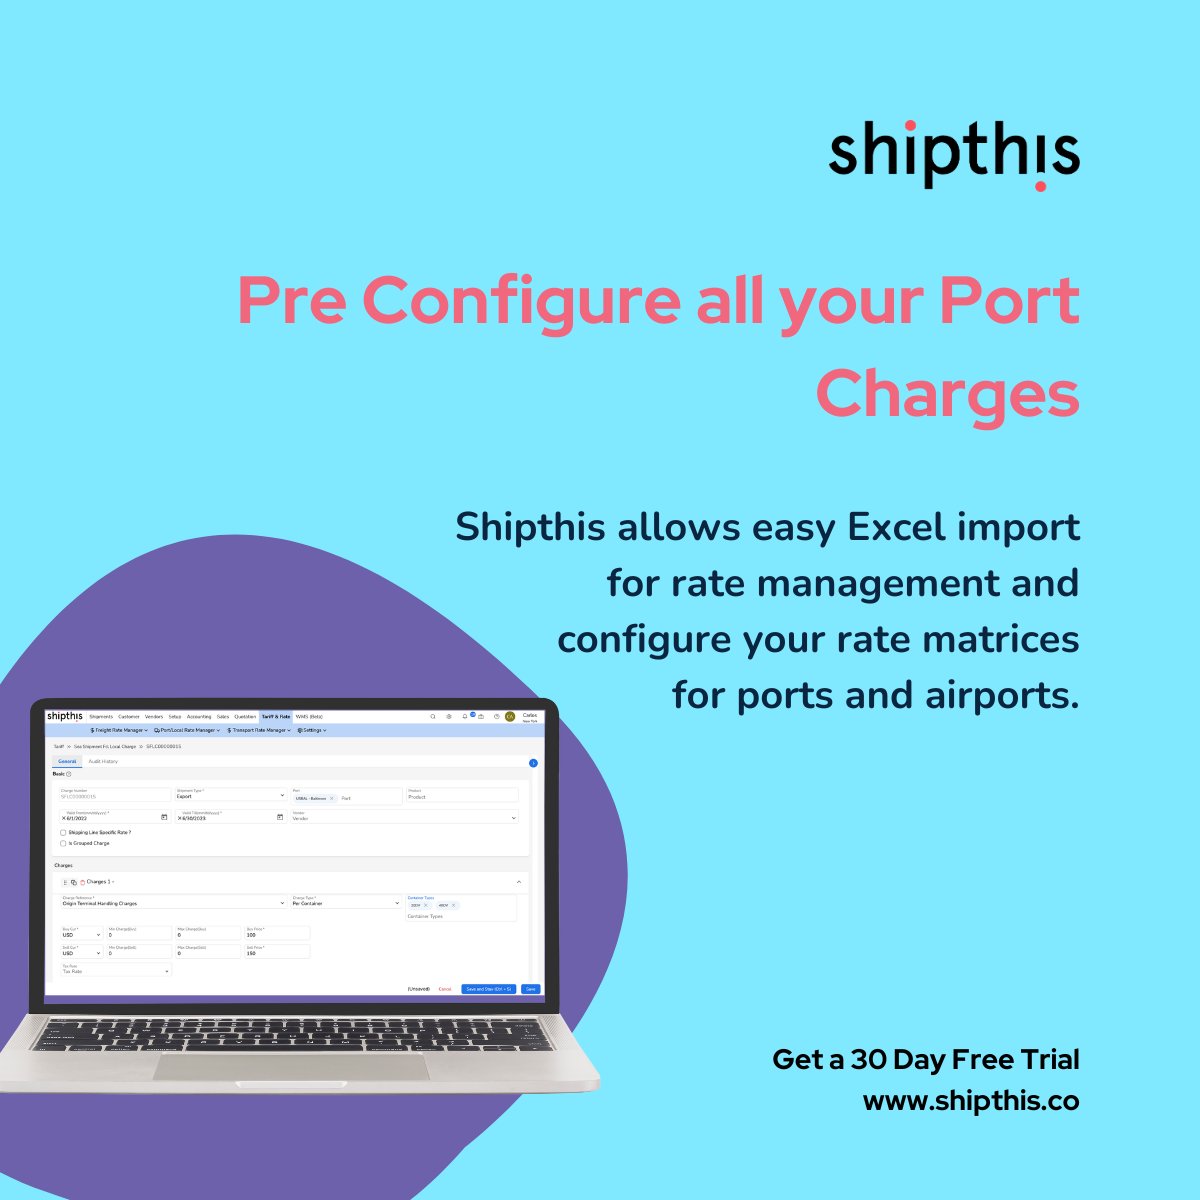 Streamline your logistics and take control of your rate management with Shipthis. Our all-in-one solution simplifies the process by allowing seamless Excel imports, making it easier than ever to configure your rate matrices for both ports & airports. #Shipthis #Freightforwarding